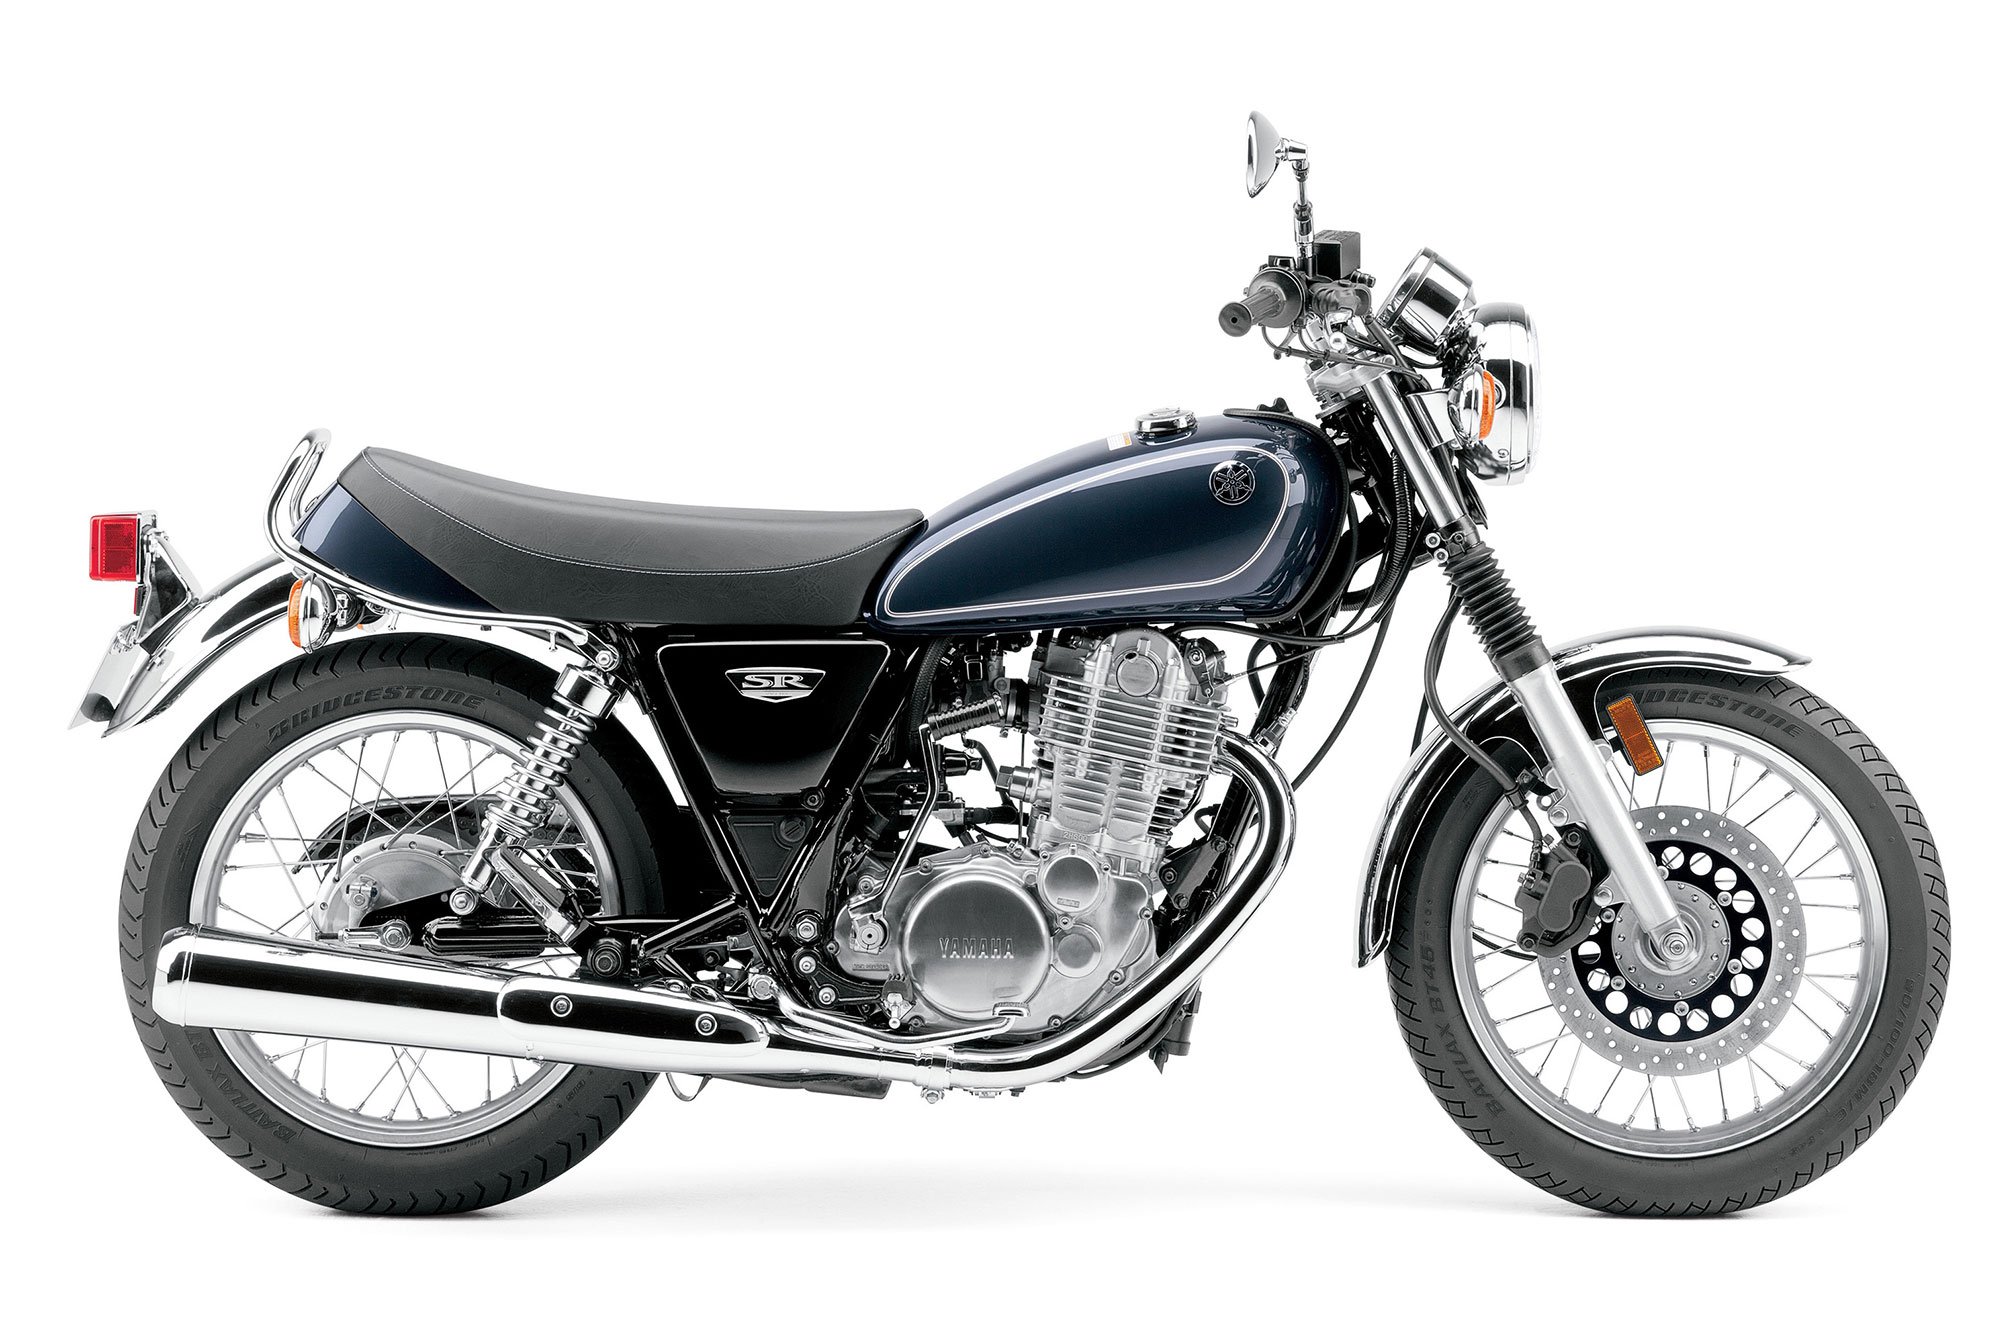 5 Minute Histories: Yamaha SR400 & SR500 - What You Need To Know